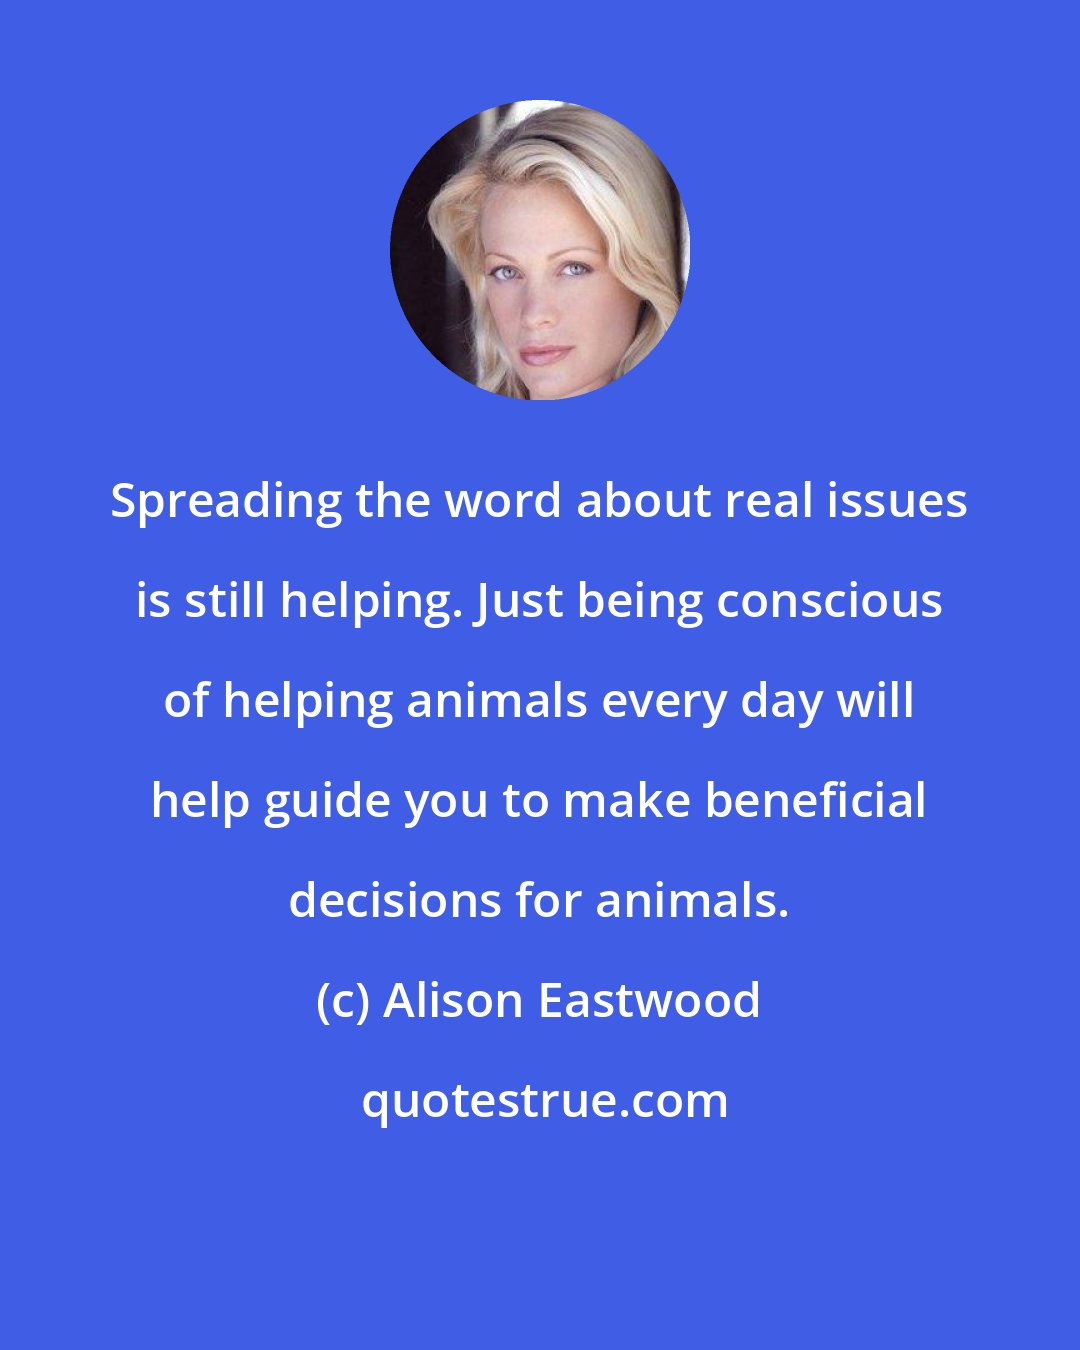 Alison Eastwood: Spreading the word about real issues is still helping. Just being conscious of helping animals every day will help guide you to make beneficial decisions for animals.